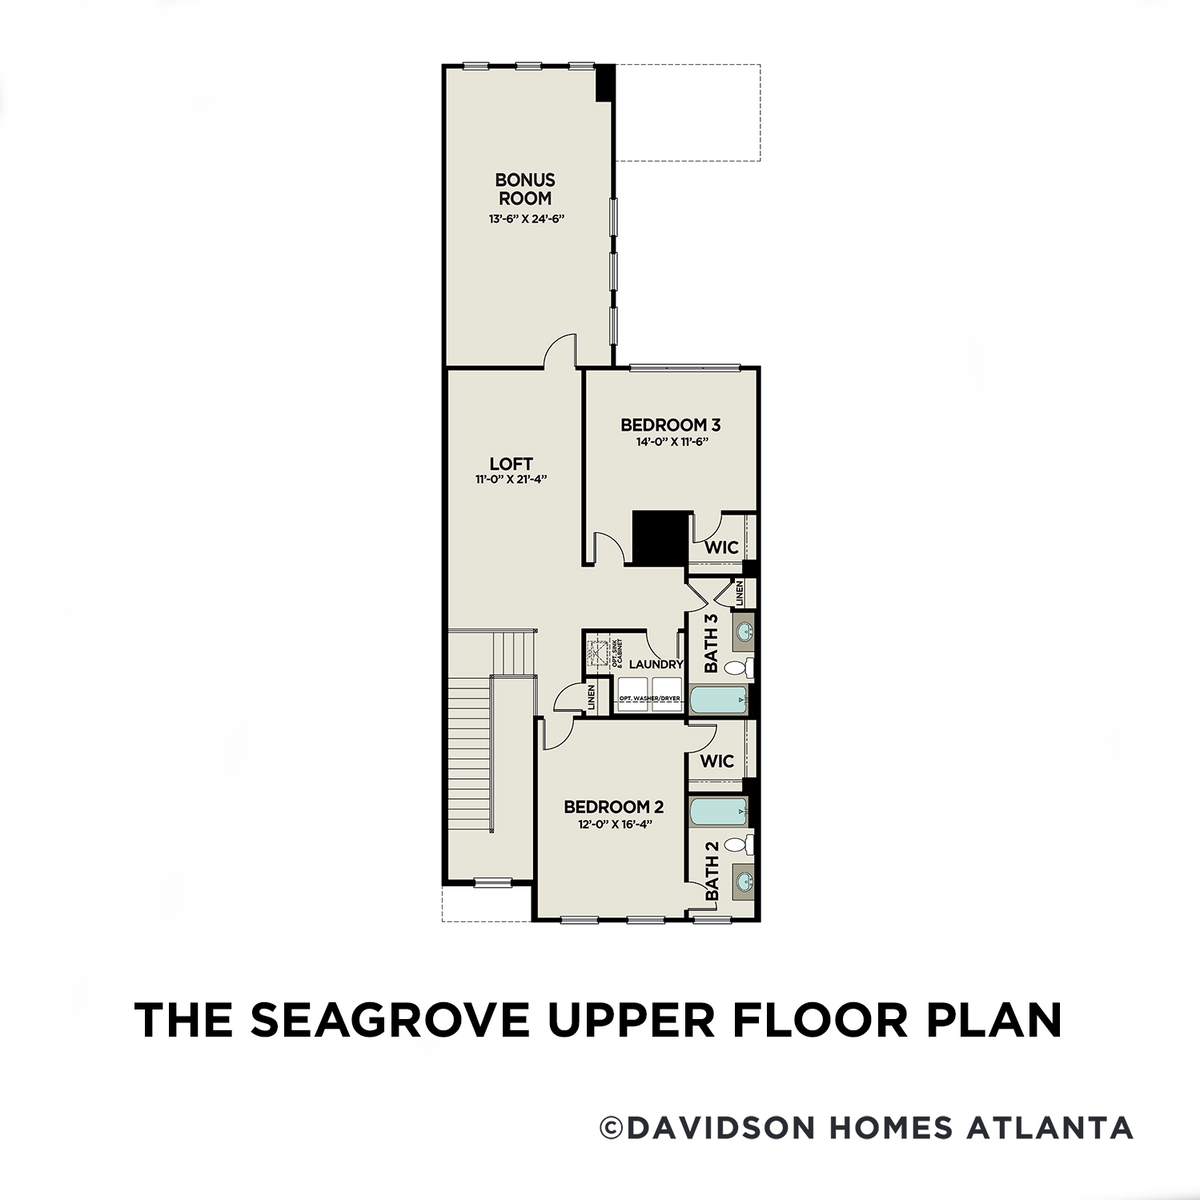 2 - The Seagrove C floor plan layout for 744 Stickley Oak Way in Davidson Homes' The Village at Towne Lake community.